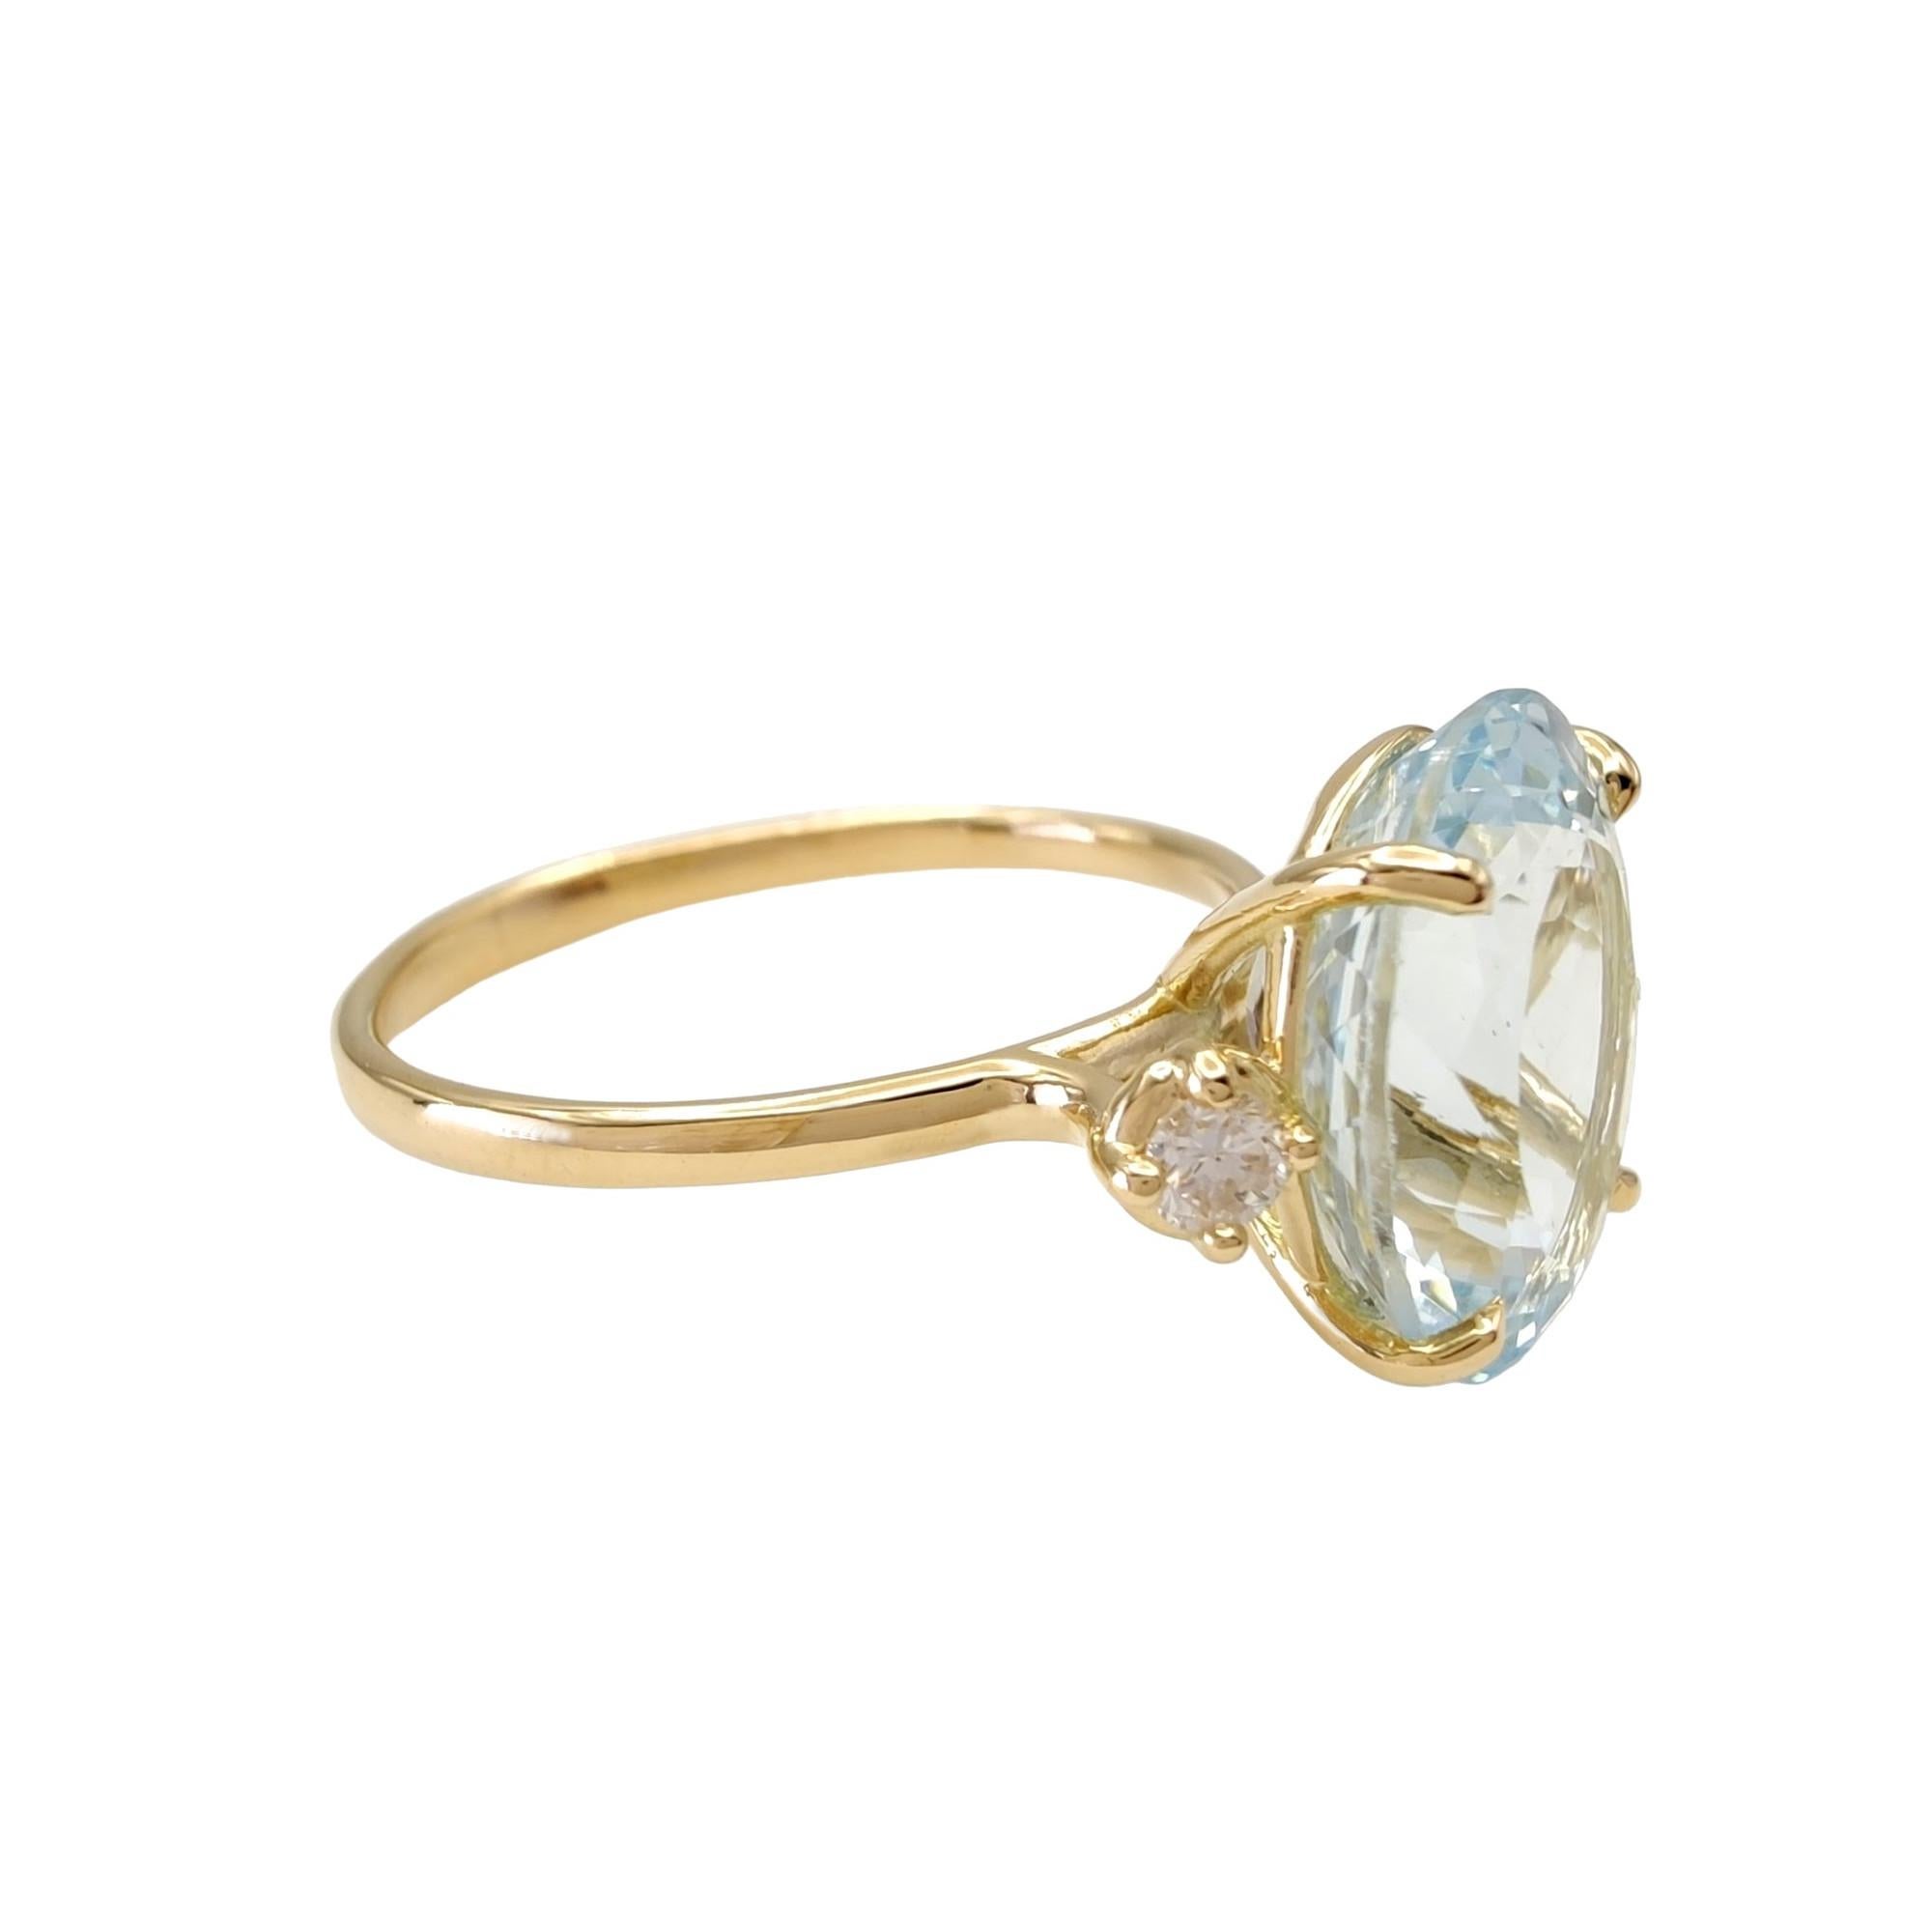 18K Gold Ring Aquamarine and Diamonds for weddings, engagements, proposals gifts 5